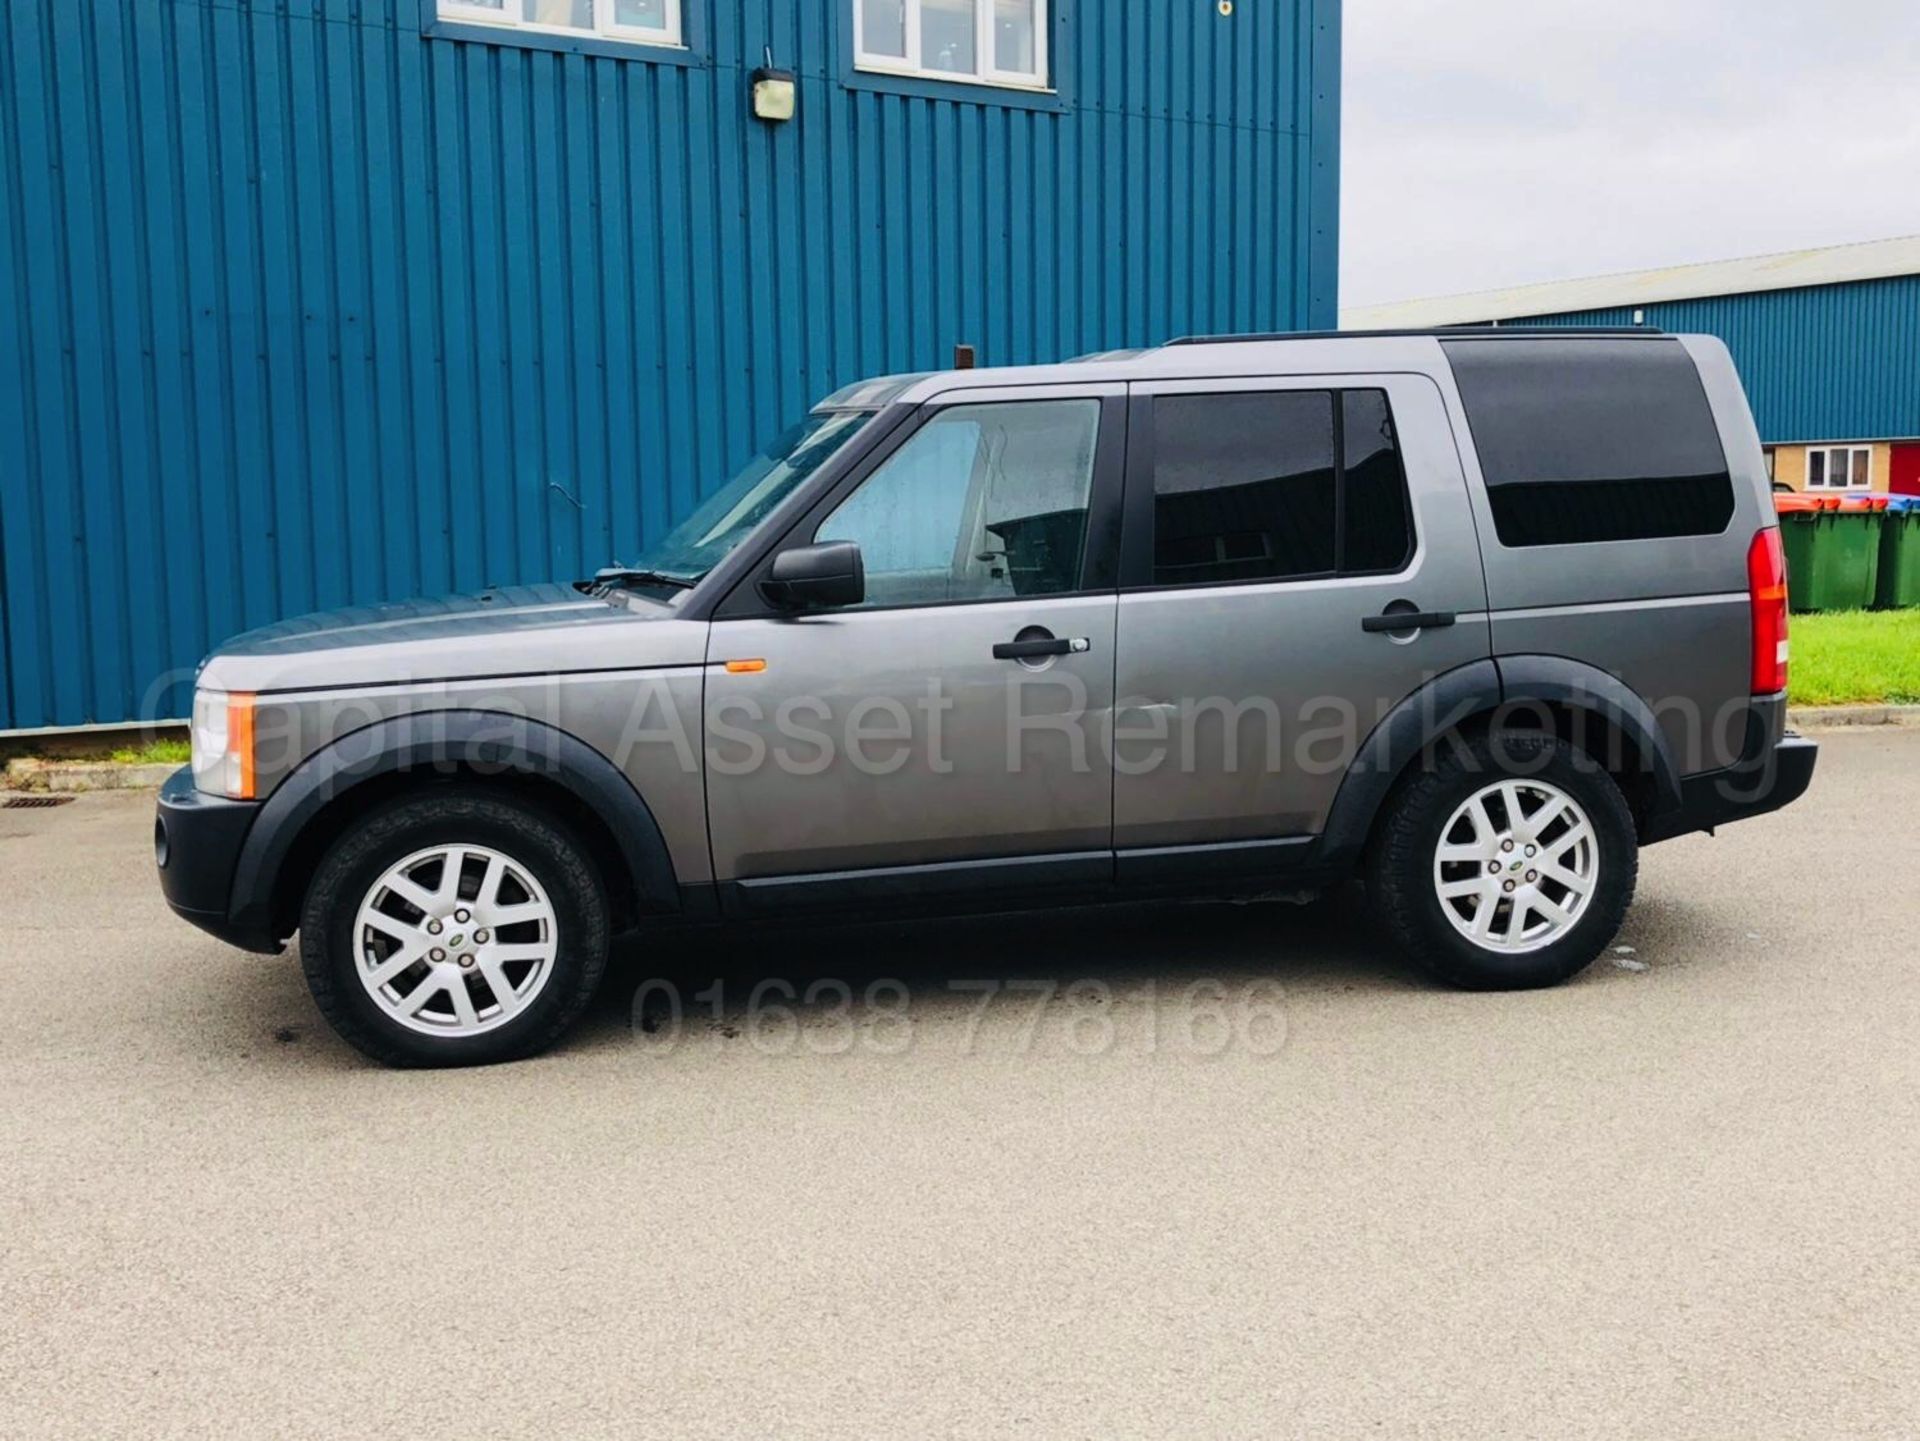 LAND ROVER DISCOVERY 3 'XS EDITION' **COMMERCIAL VAN TYPE** (2008 MODEL) '2.7 TDV6 - 190 BHP - 4X4' - Image 5 of 33